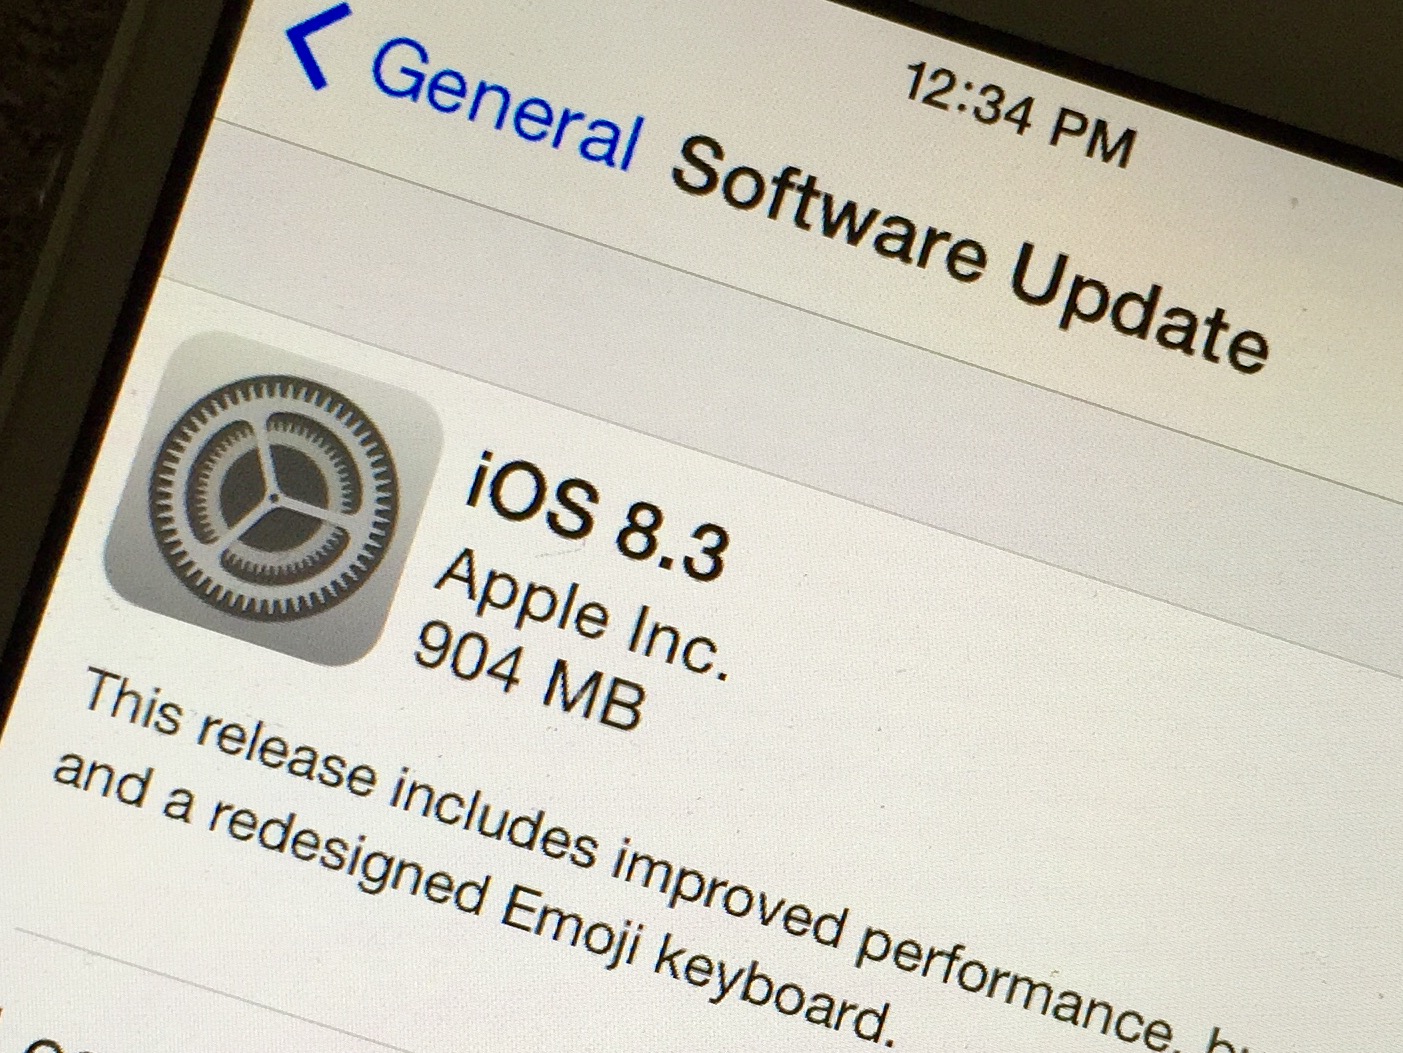 Read user iPhone 4s iOS 8.3 reviews to decide if you should install it.